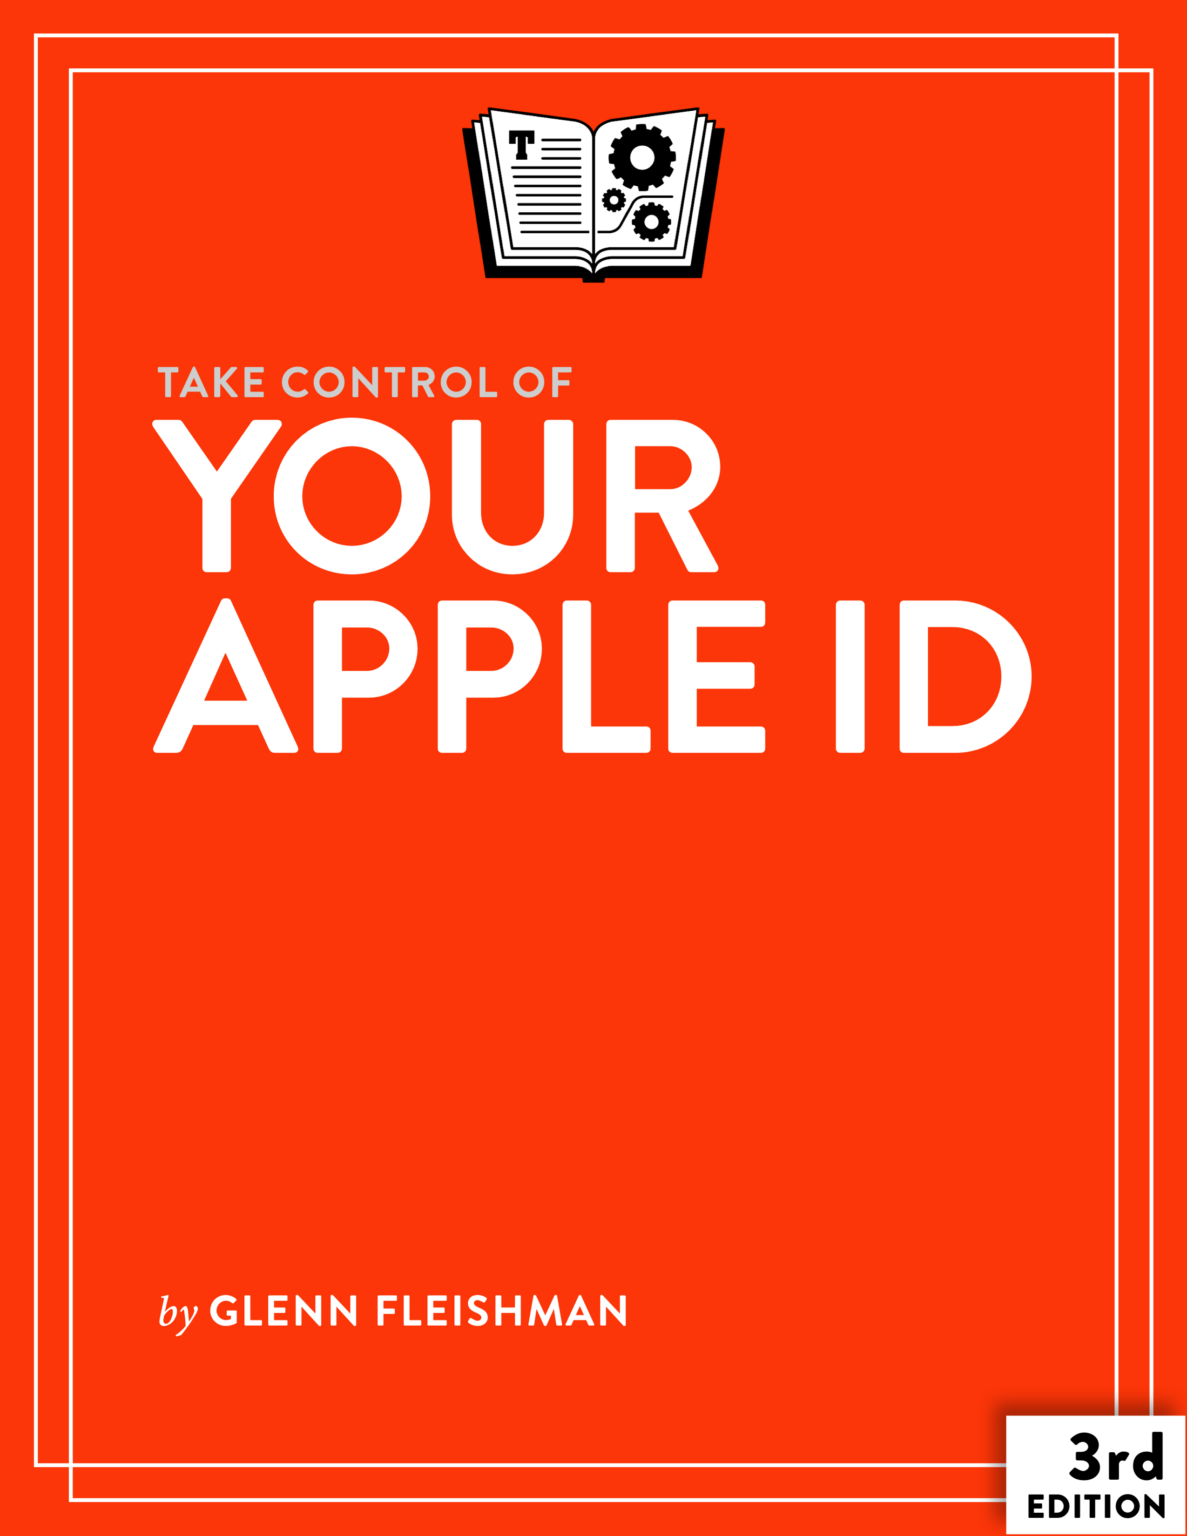 Take-Control-of-Your-Apple-ID-3.0-cover-1187x1536.png